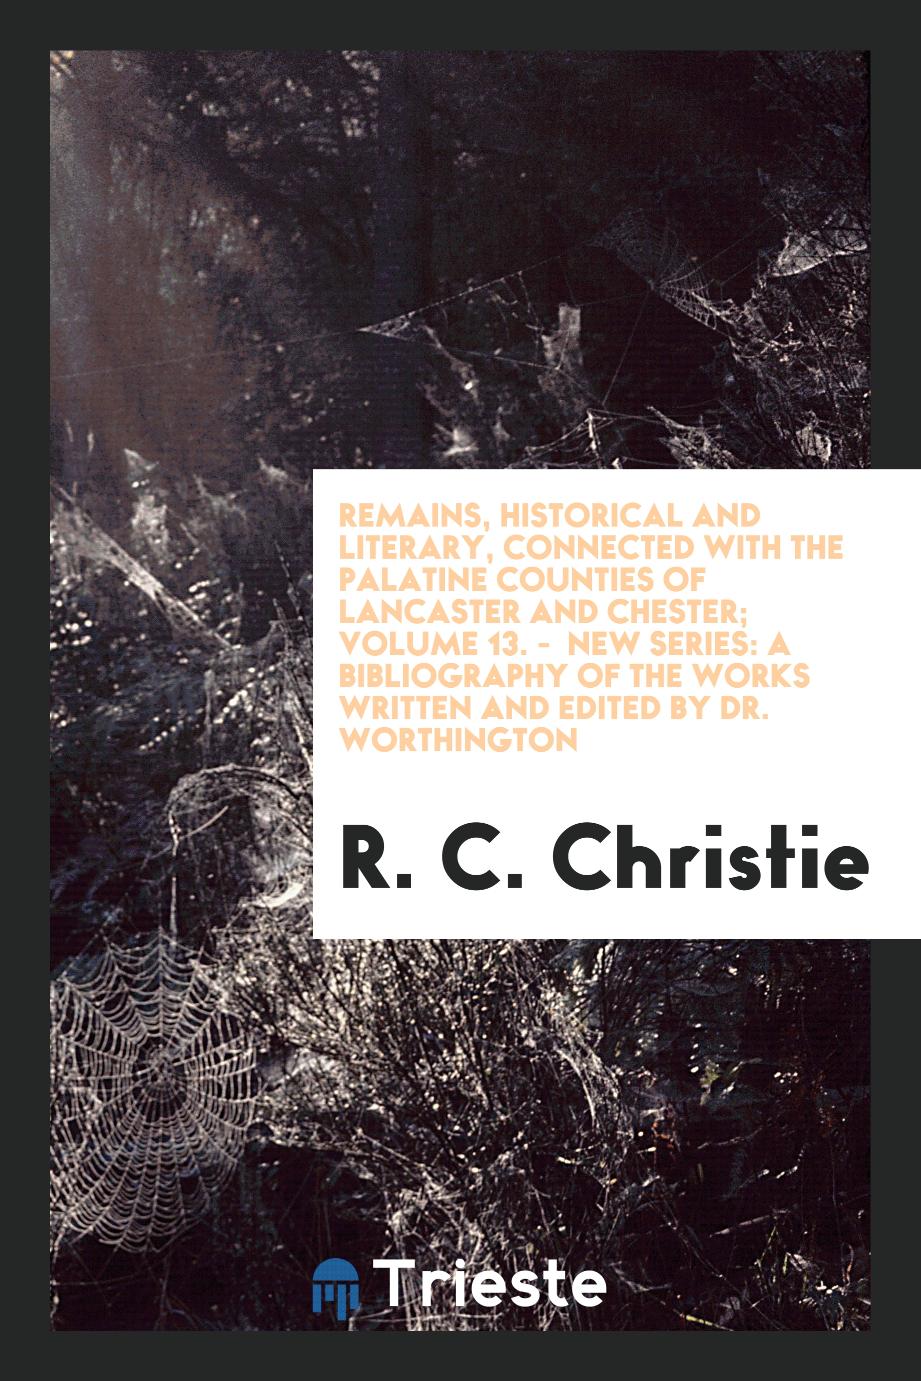 Remains, Historical and Literary, Connected with the Palatine Counties of Lancaster and Chester; Volume 13. - New Series: A Bibliography of the Works Written and Edited by Dr. Worthington